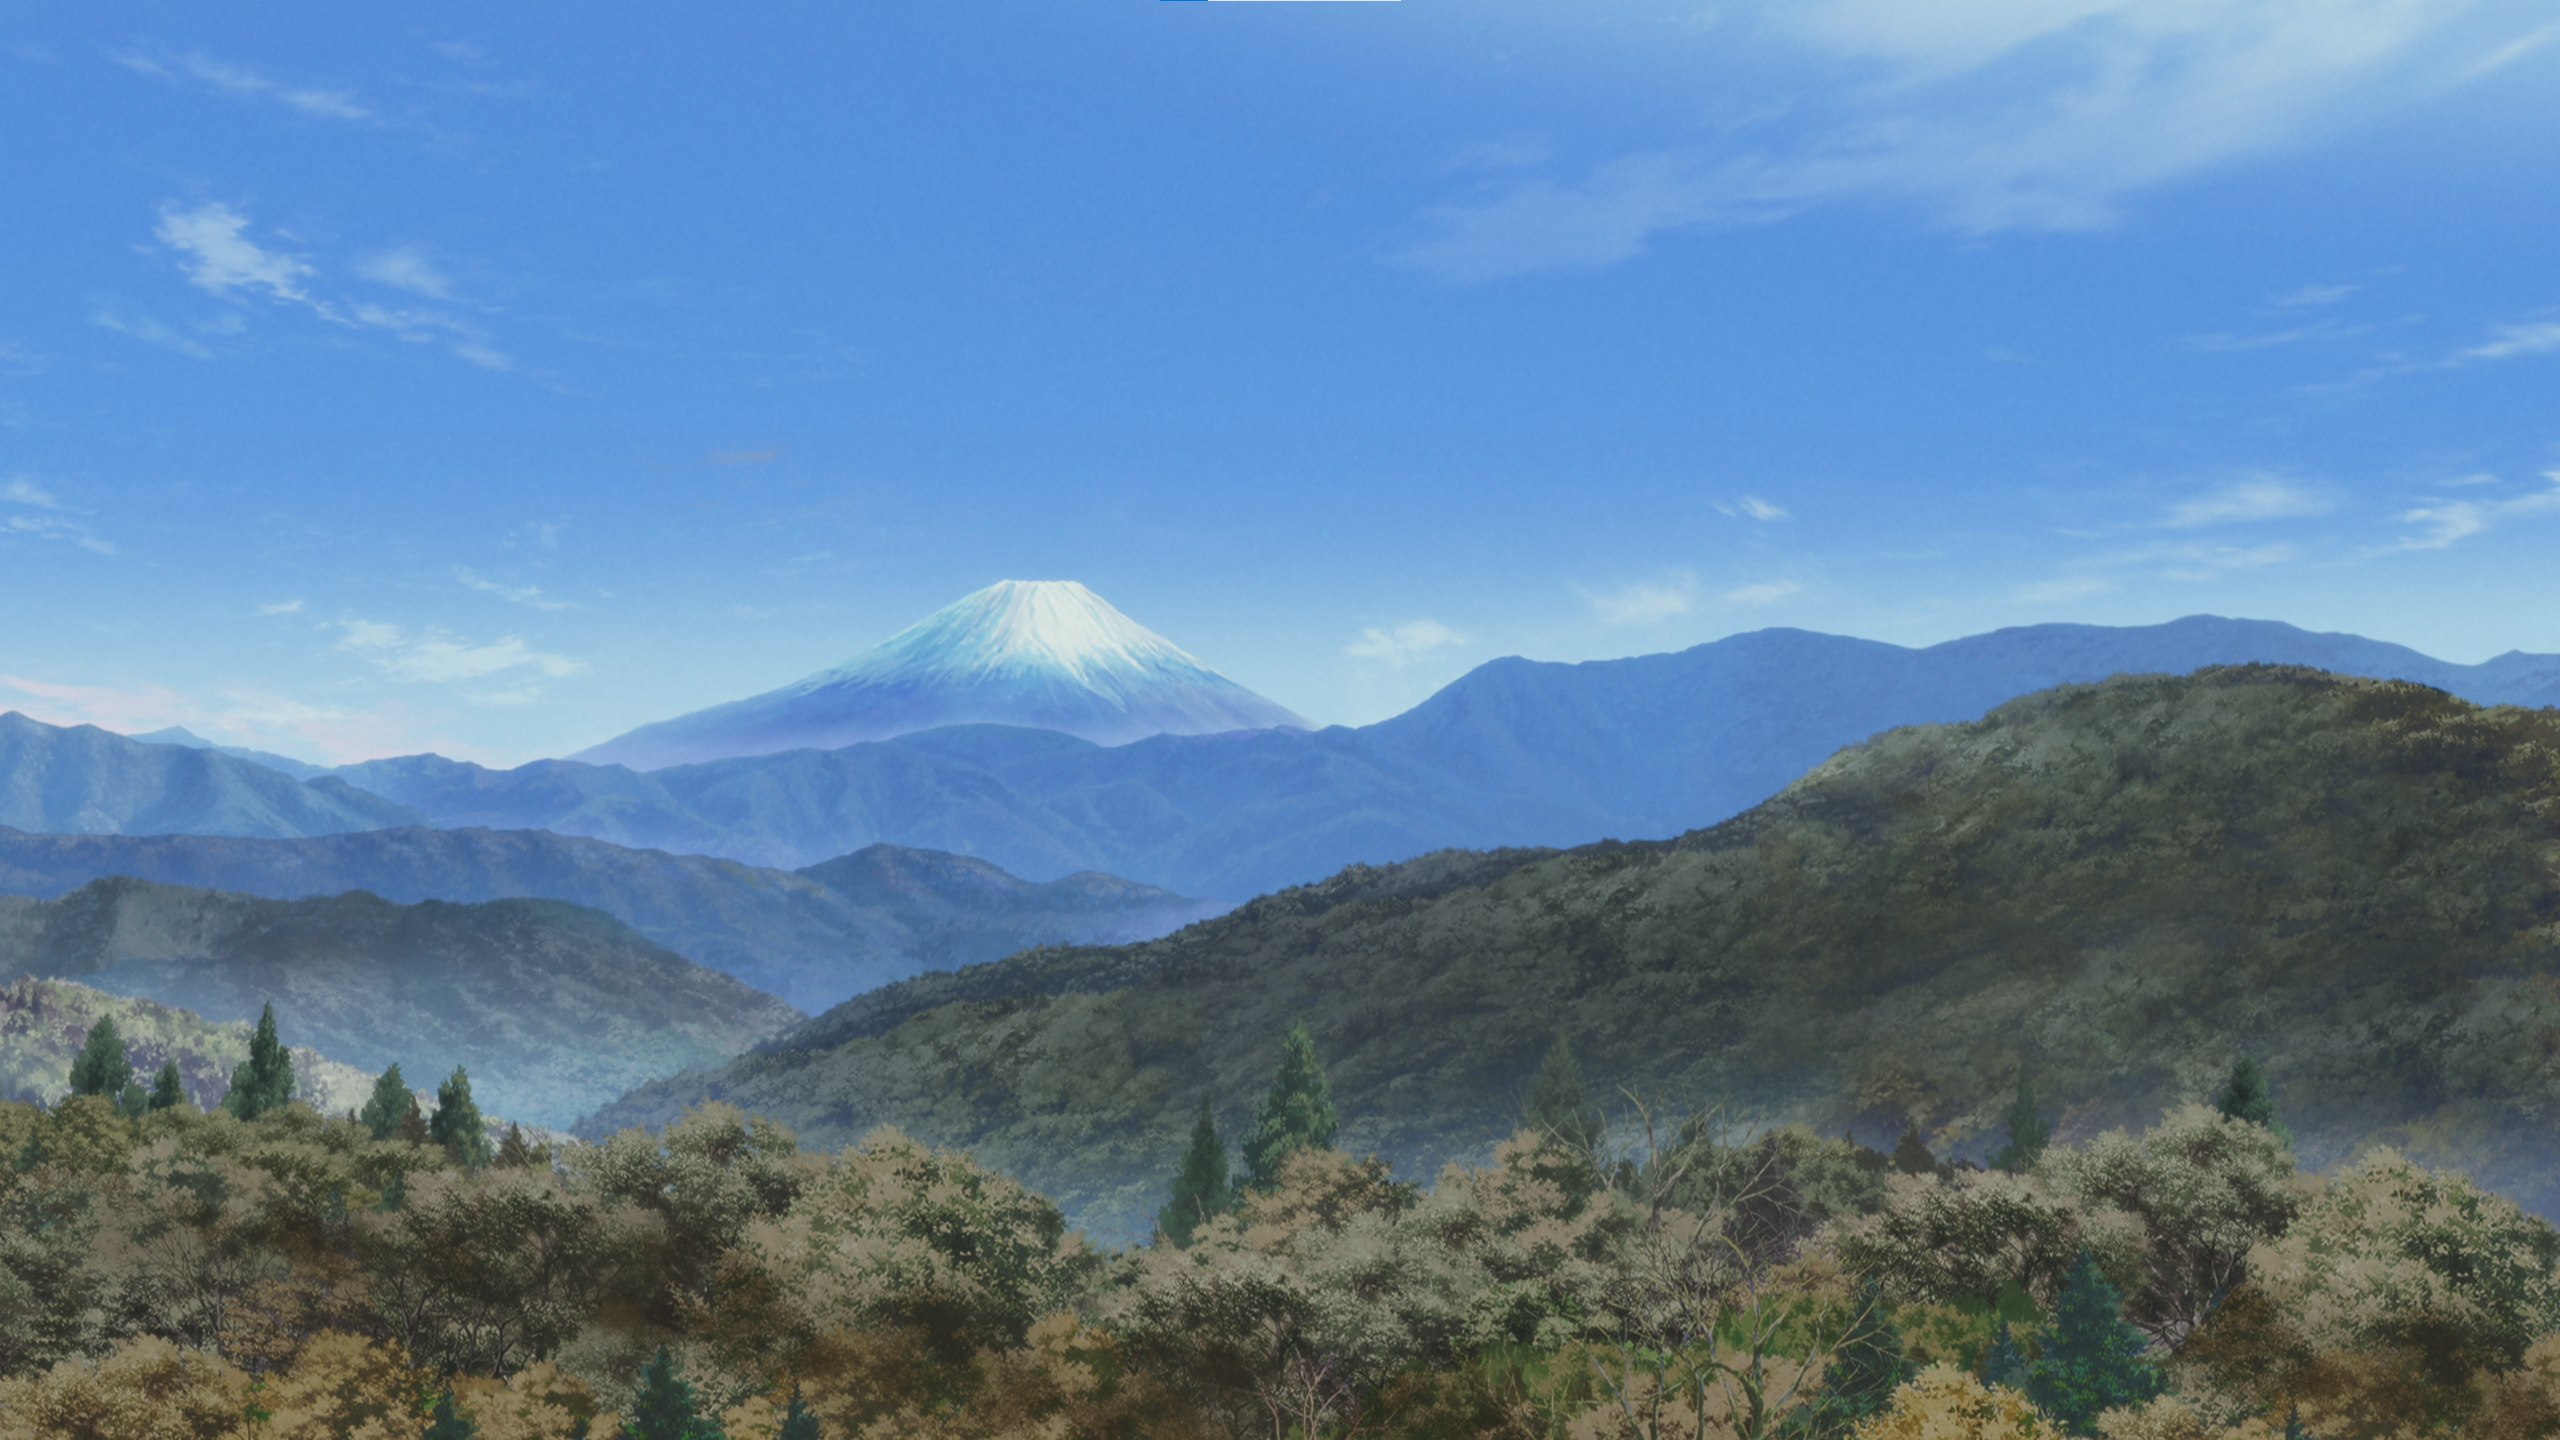 Anime 2560x1440 Yuru Camp mountains drawn snow forest landscape cold sky clouds screen shot trees Anime screenshot anime nature